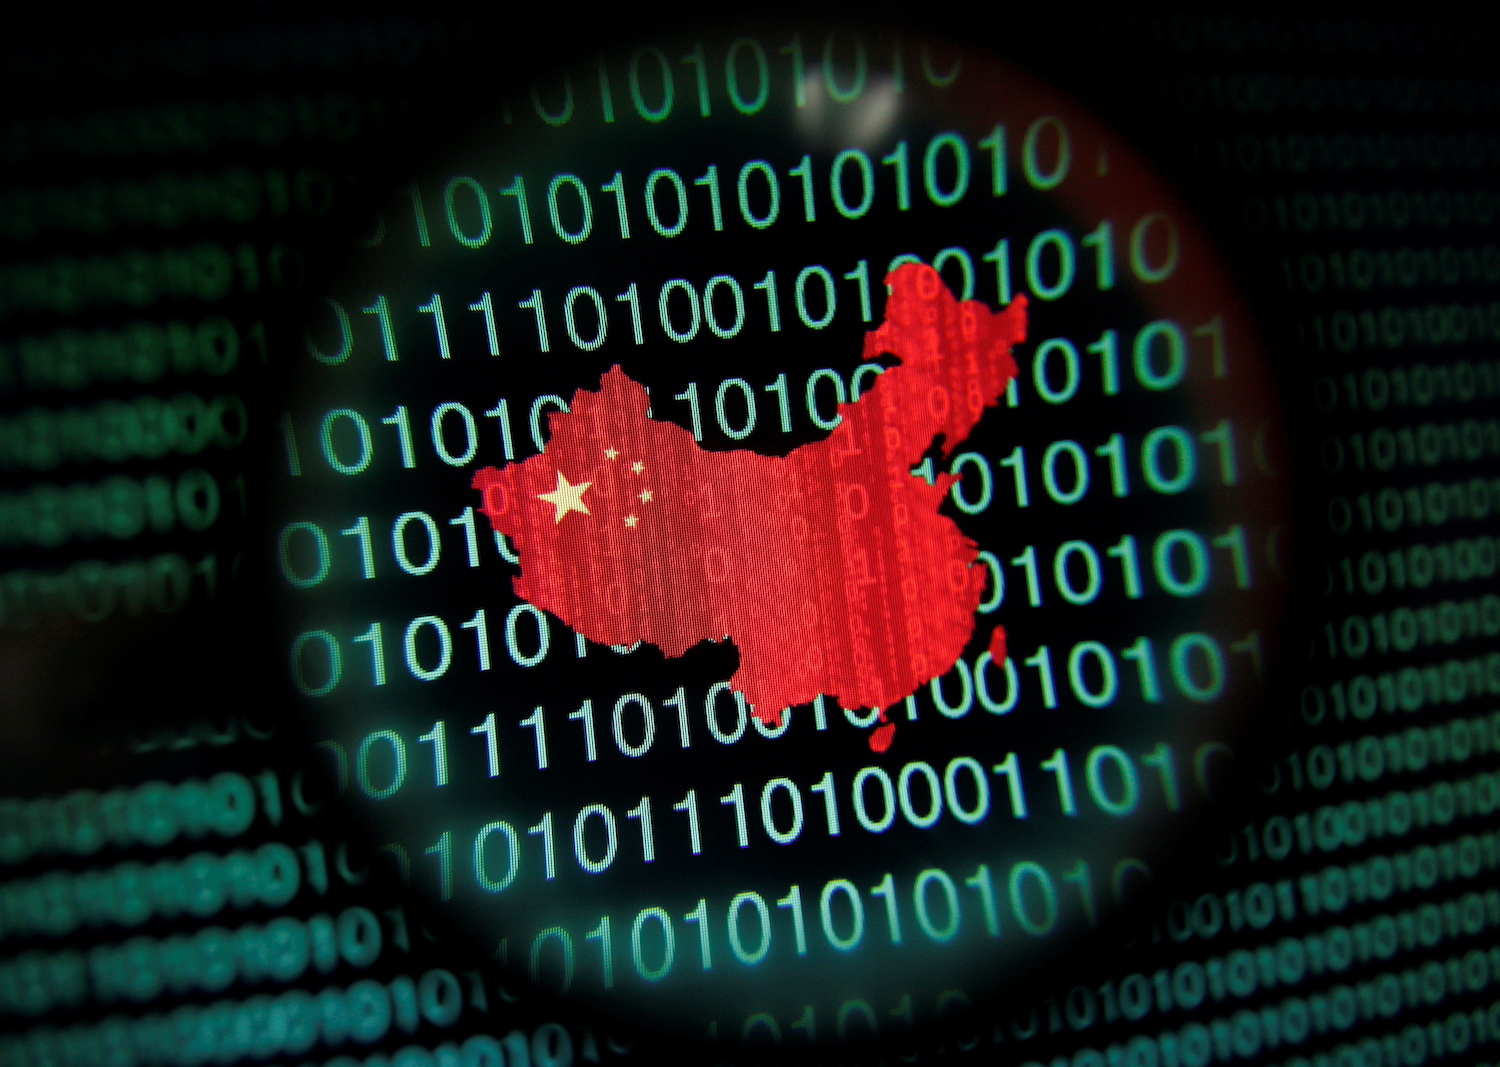 China’s Tech Crackdown Seen Leading to State-Supervised Data Trading Markets